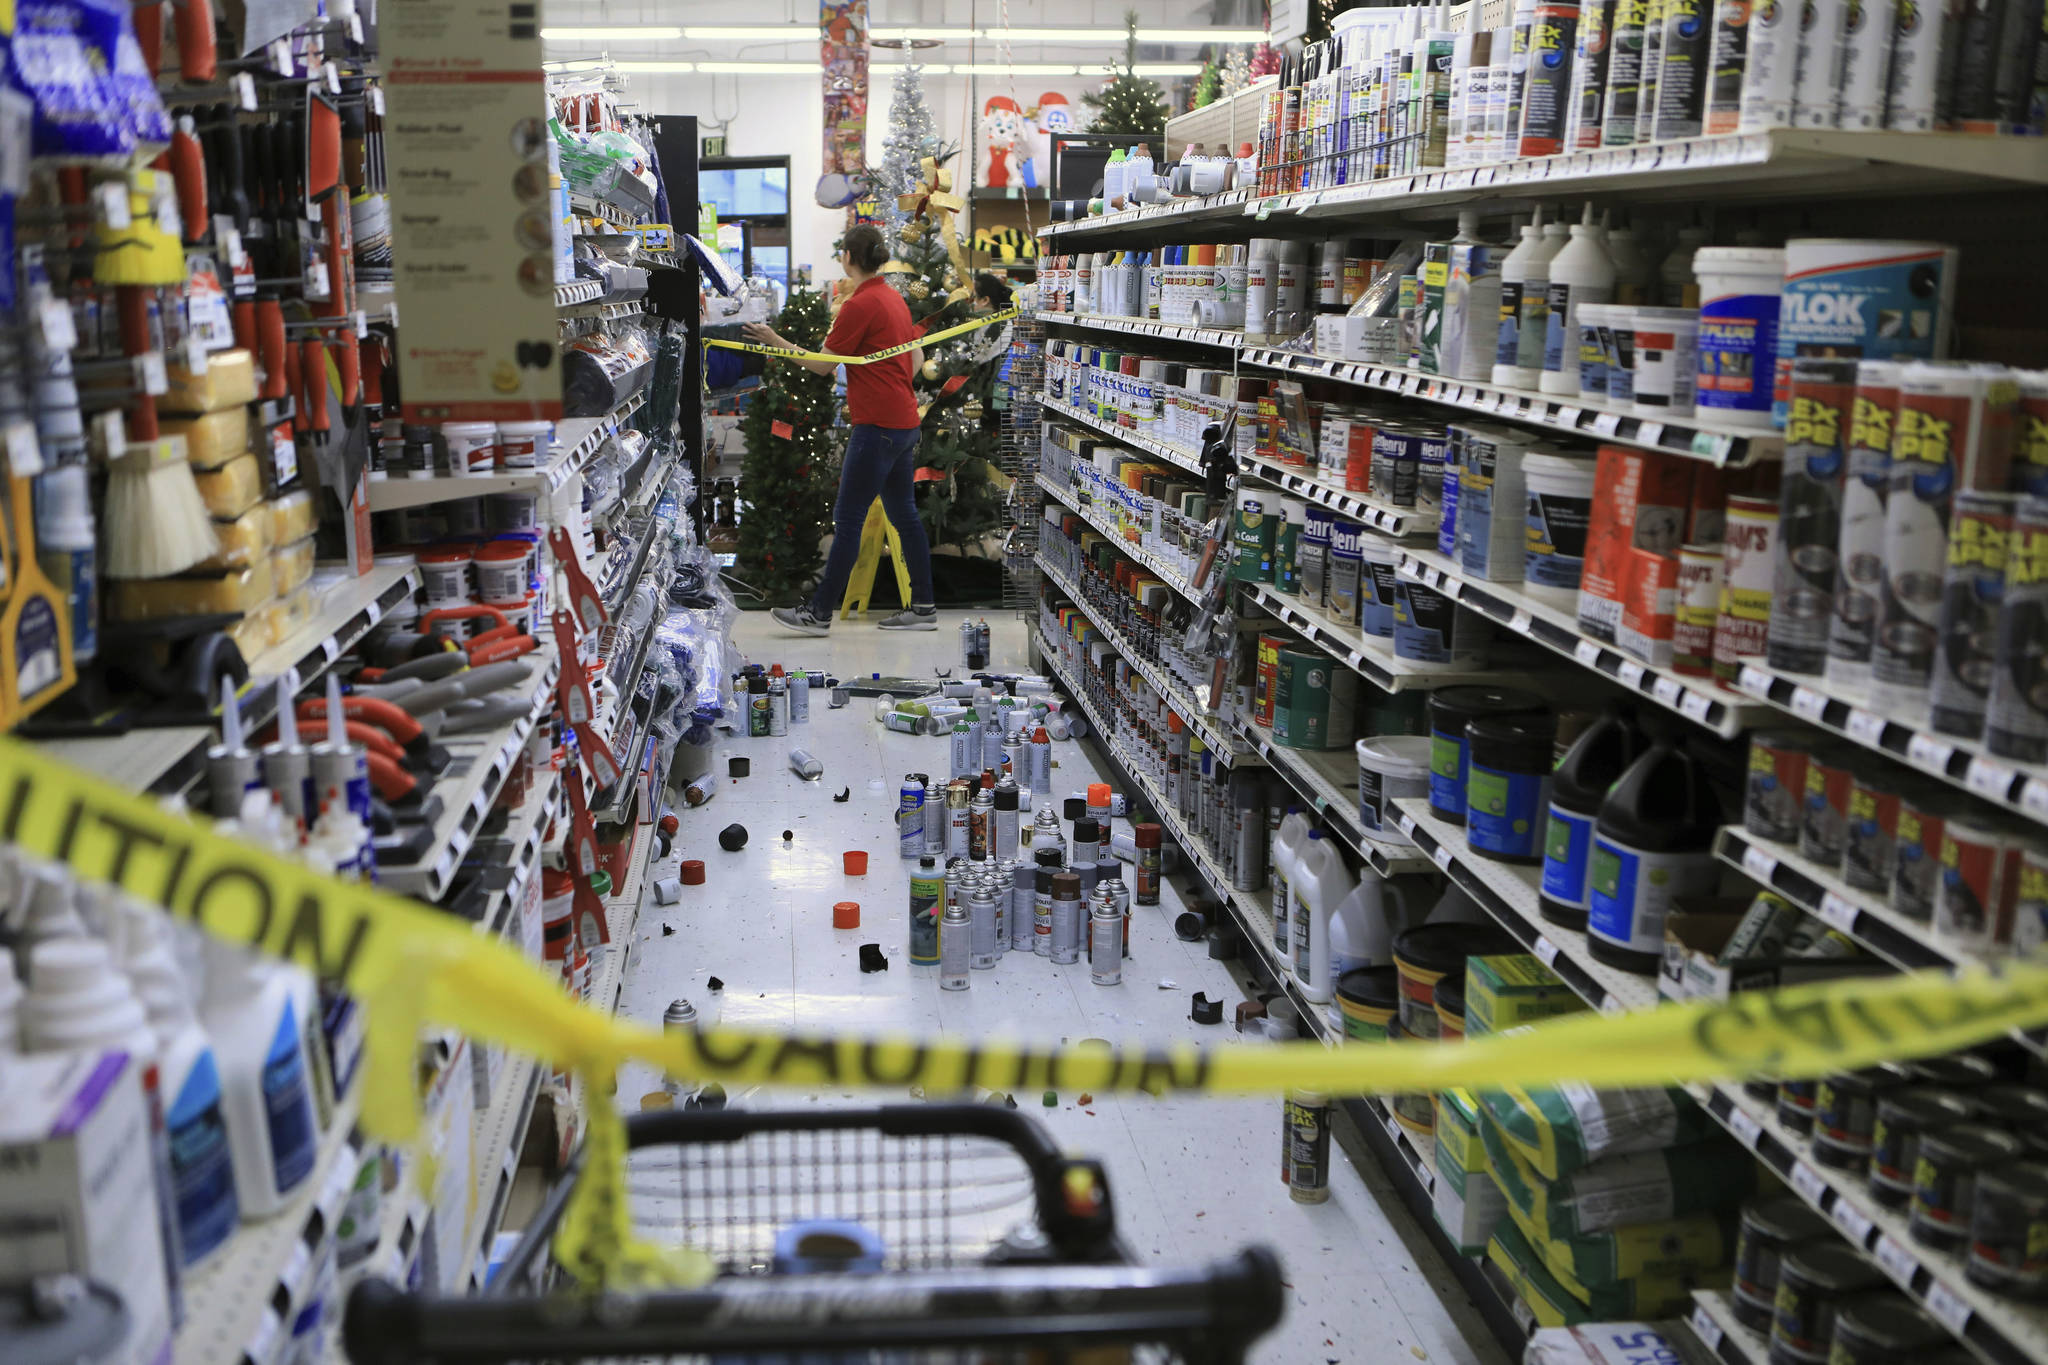 An employee walks past a damaged aisle at Anchorage True Value hardware store after an earthquake, Friday morning, Nov. 30, 2018, in Anchorage, Alaska. Tim Craig, owner of the south Anchorage store, said no one was injured but hundreds of items hit the floor and two shelves collapsed in a stock room. (AP Photo/Dan Joling)